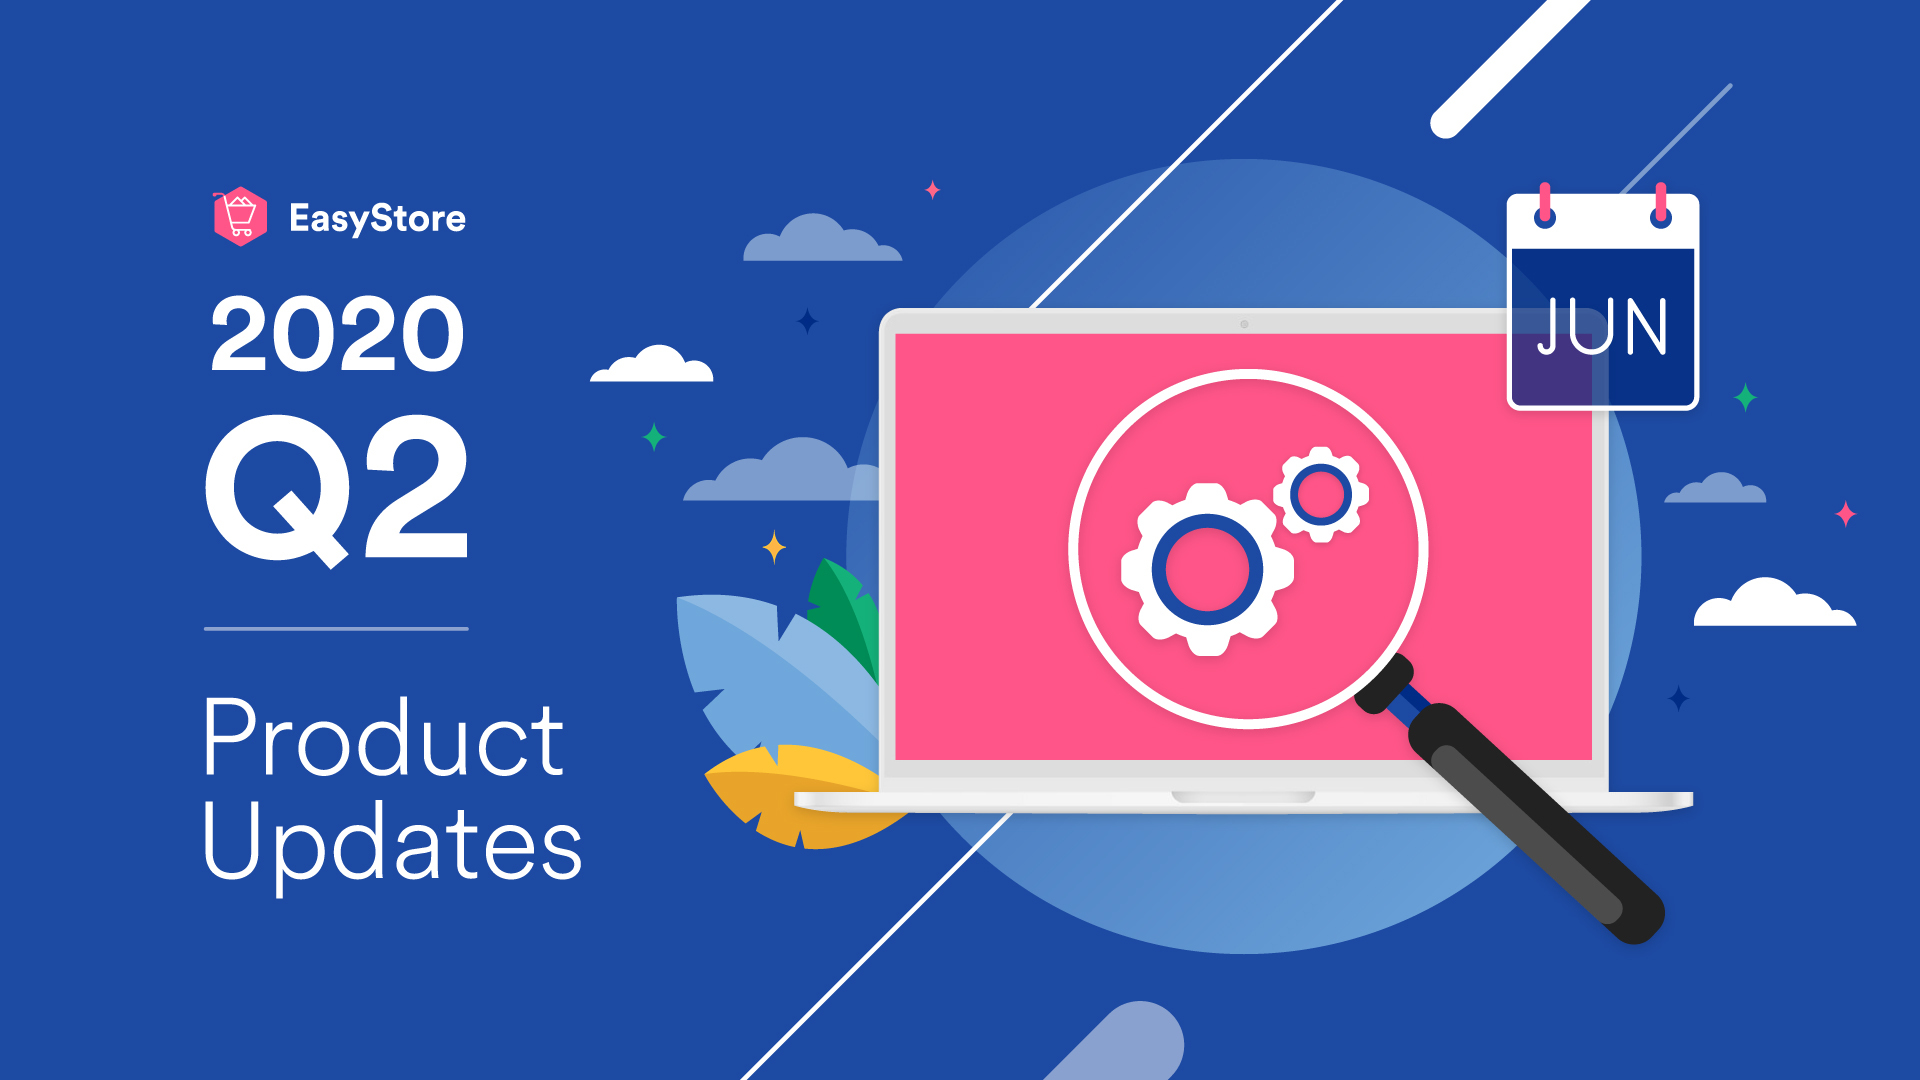 EasyStore Product Updates: April - June 2020 | EasyStore